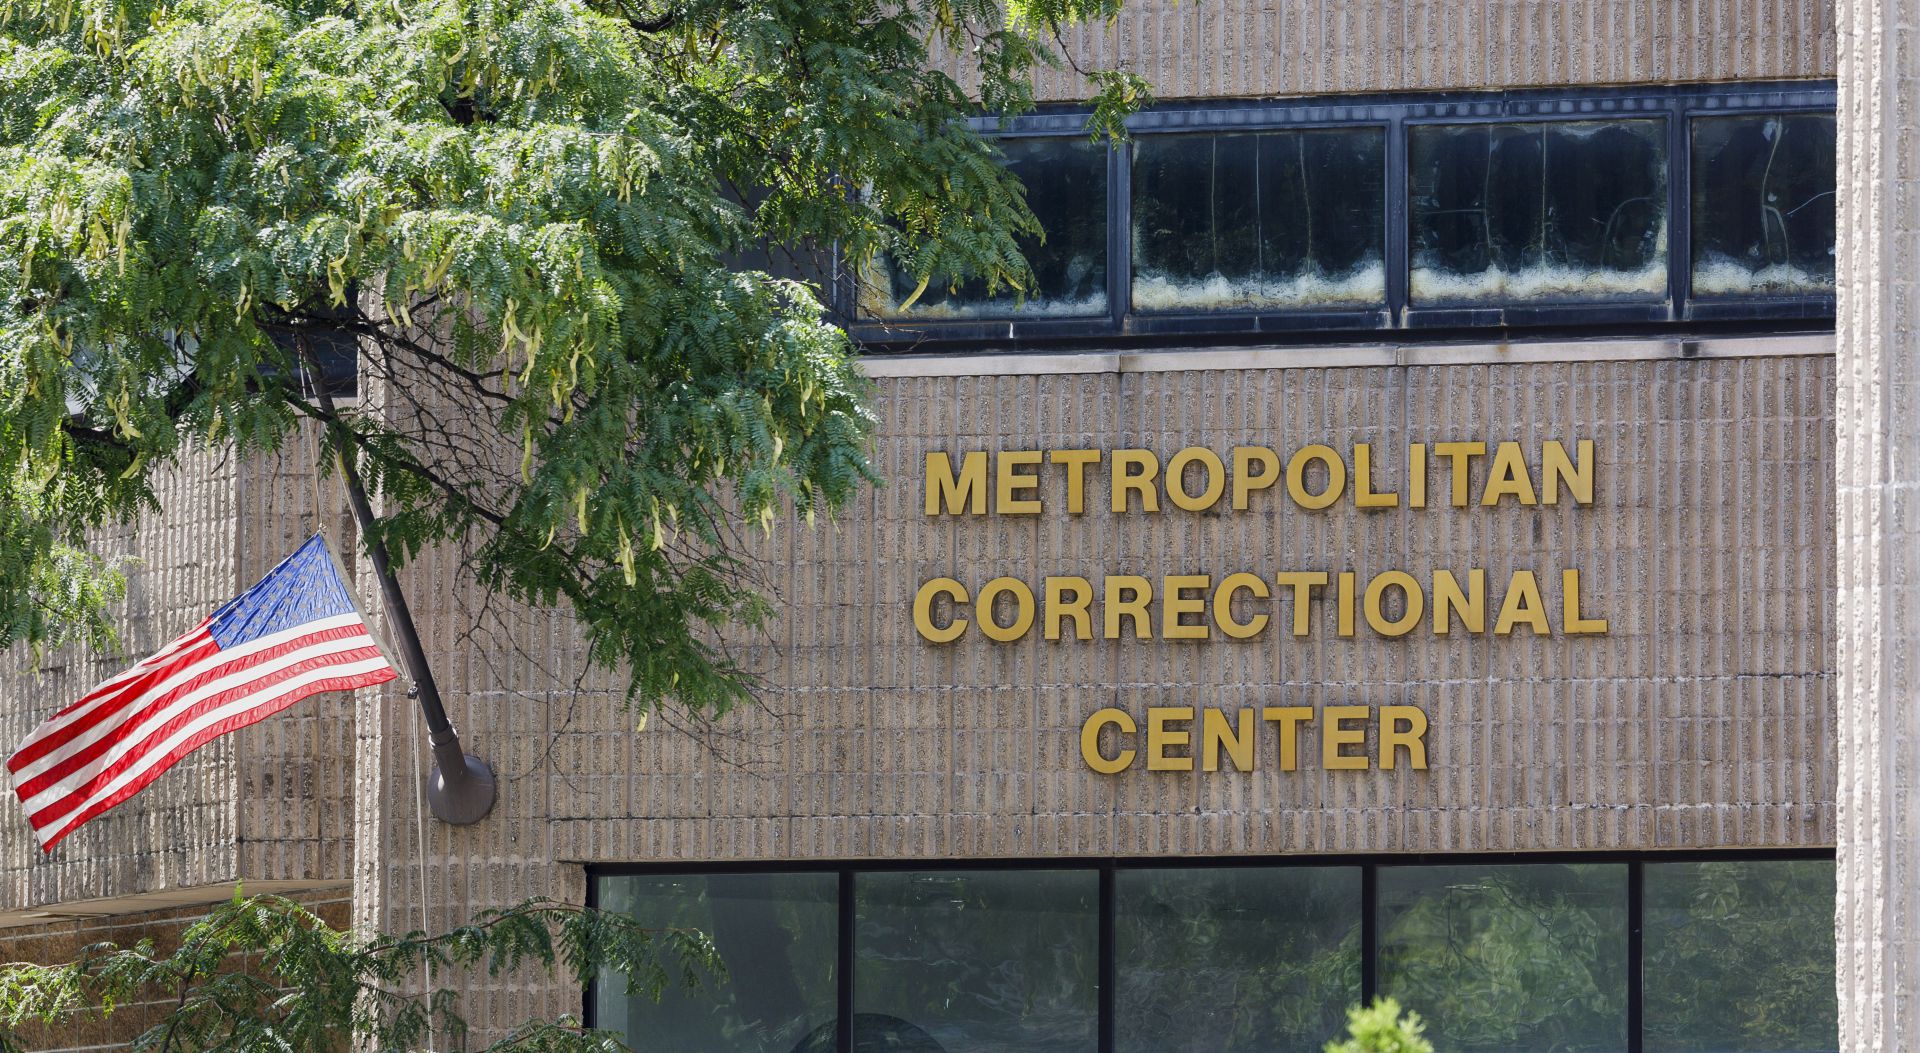 epa07775261 A view of the Metropolitan Correctional Center, the prison where the US financier Jeffrey Epstein was found dead in his jail cell on 10 August 2019, in New York, New York, USA, 15 August 2019. An autopsy report released today by New York City’s chief medical examiner indicated that Epstein had broken bones in his neck that sometimes are connected to a suicide, but are more common in victims of strangulation.  EPA/JUSTIN LANE